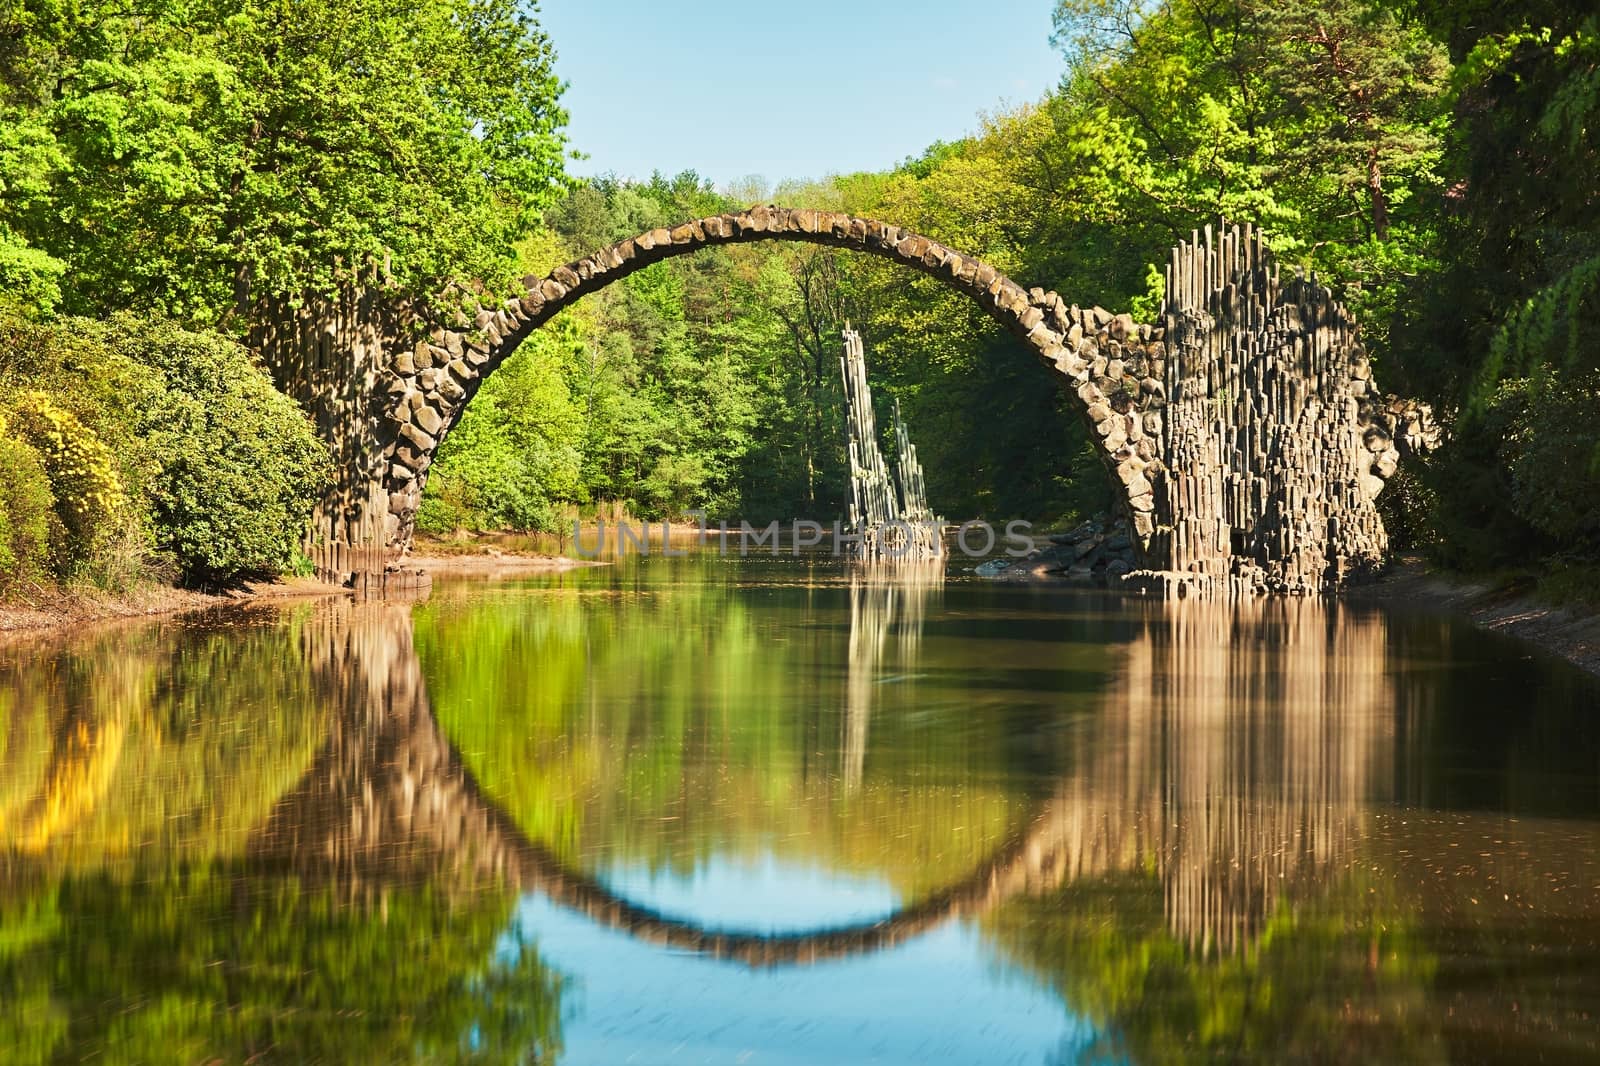 Amazing place in Germany - Rakotzbrucke also known as Devils Bridge in Kromlau. Reflection of the bridge in the water create a full circle.